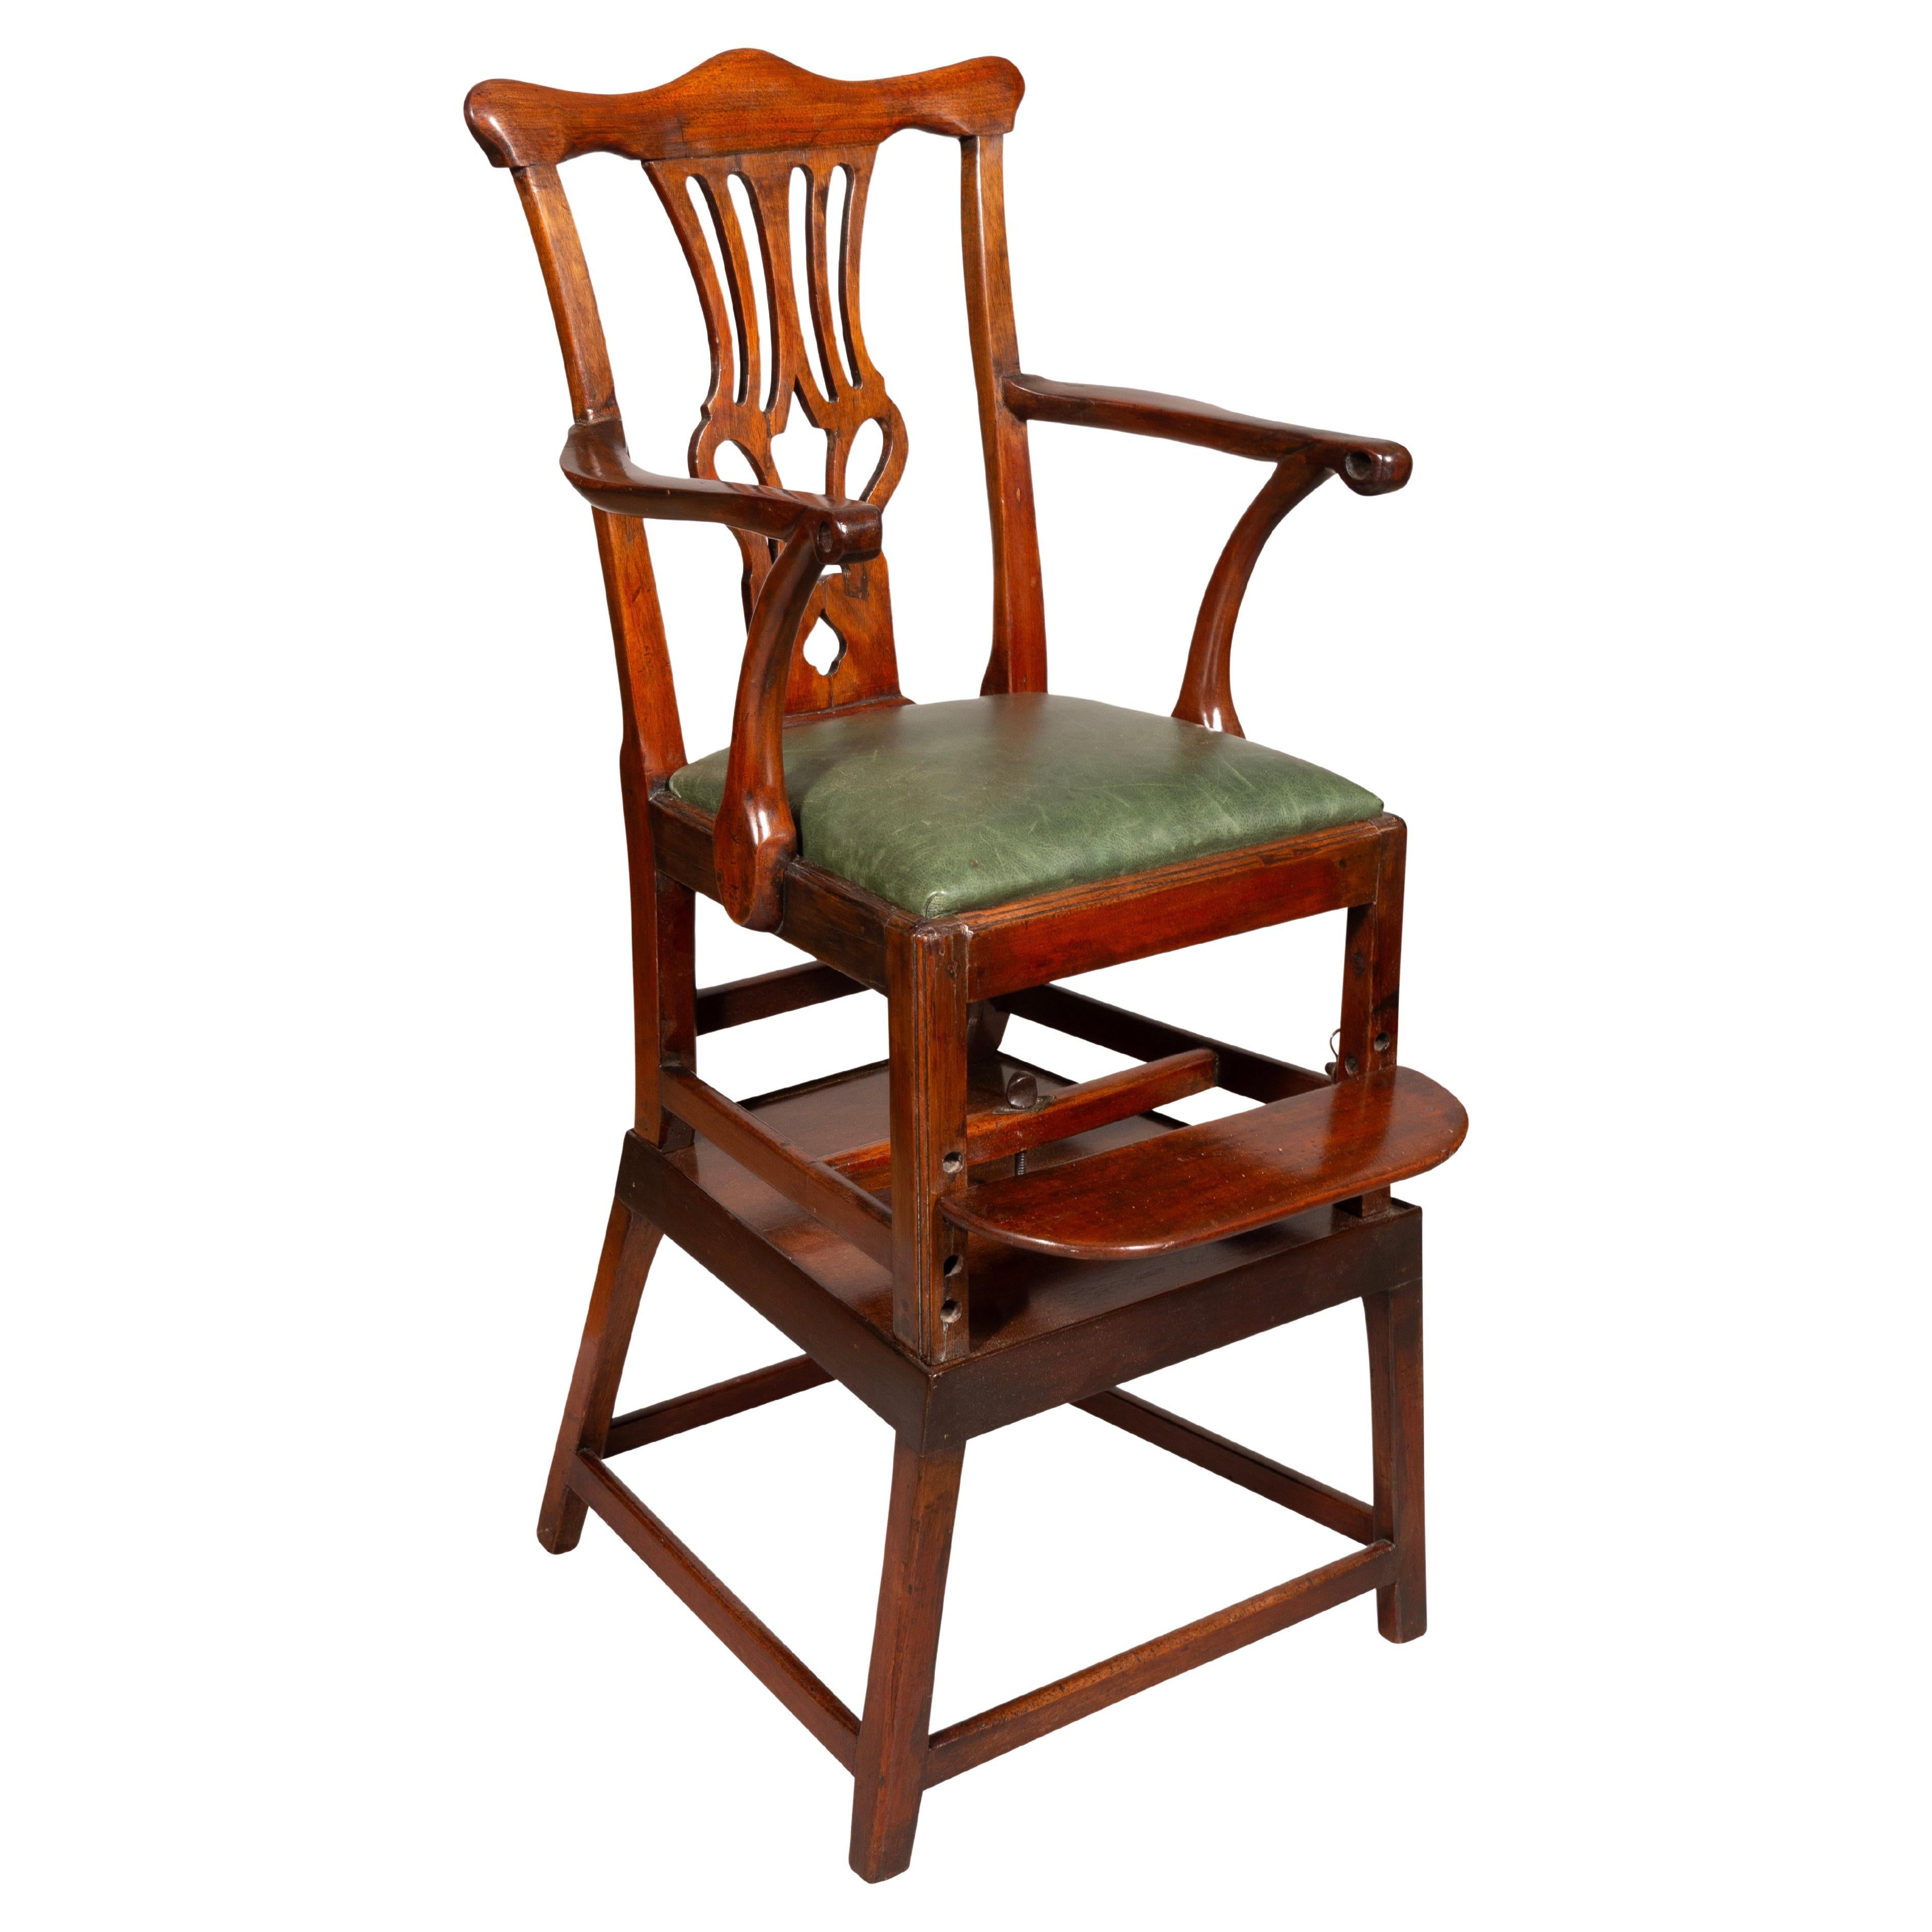 George III Mahogany Childs High Chair For Sale